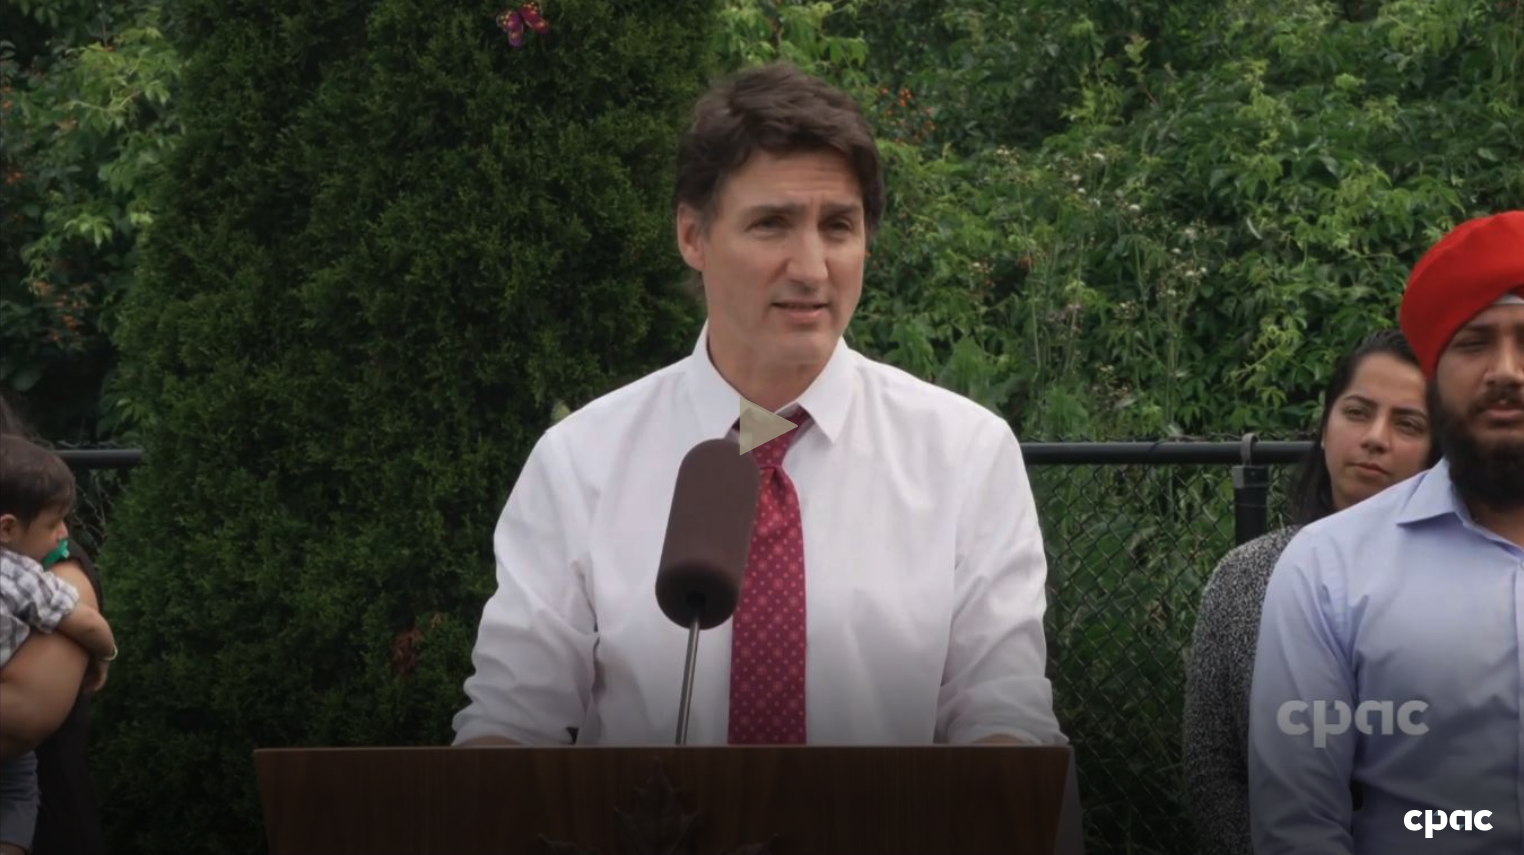 A screenshot from the CPAC video of Justin Trudeau making an announcement at a lectern.